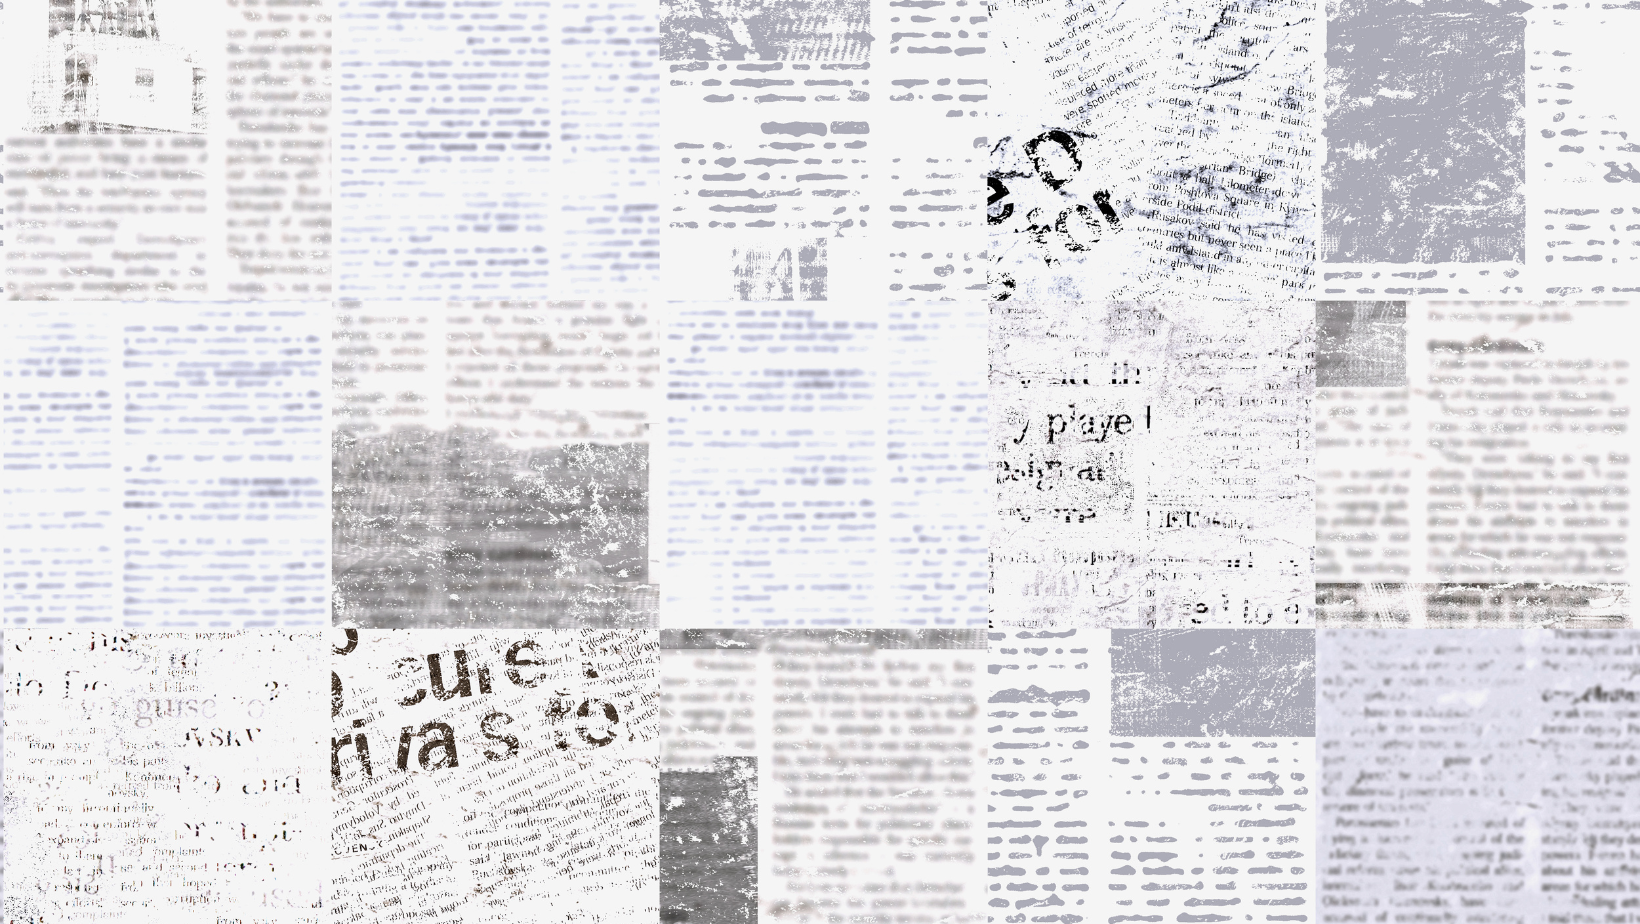 How to Use Newspaper as Wallpaper